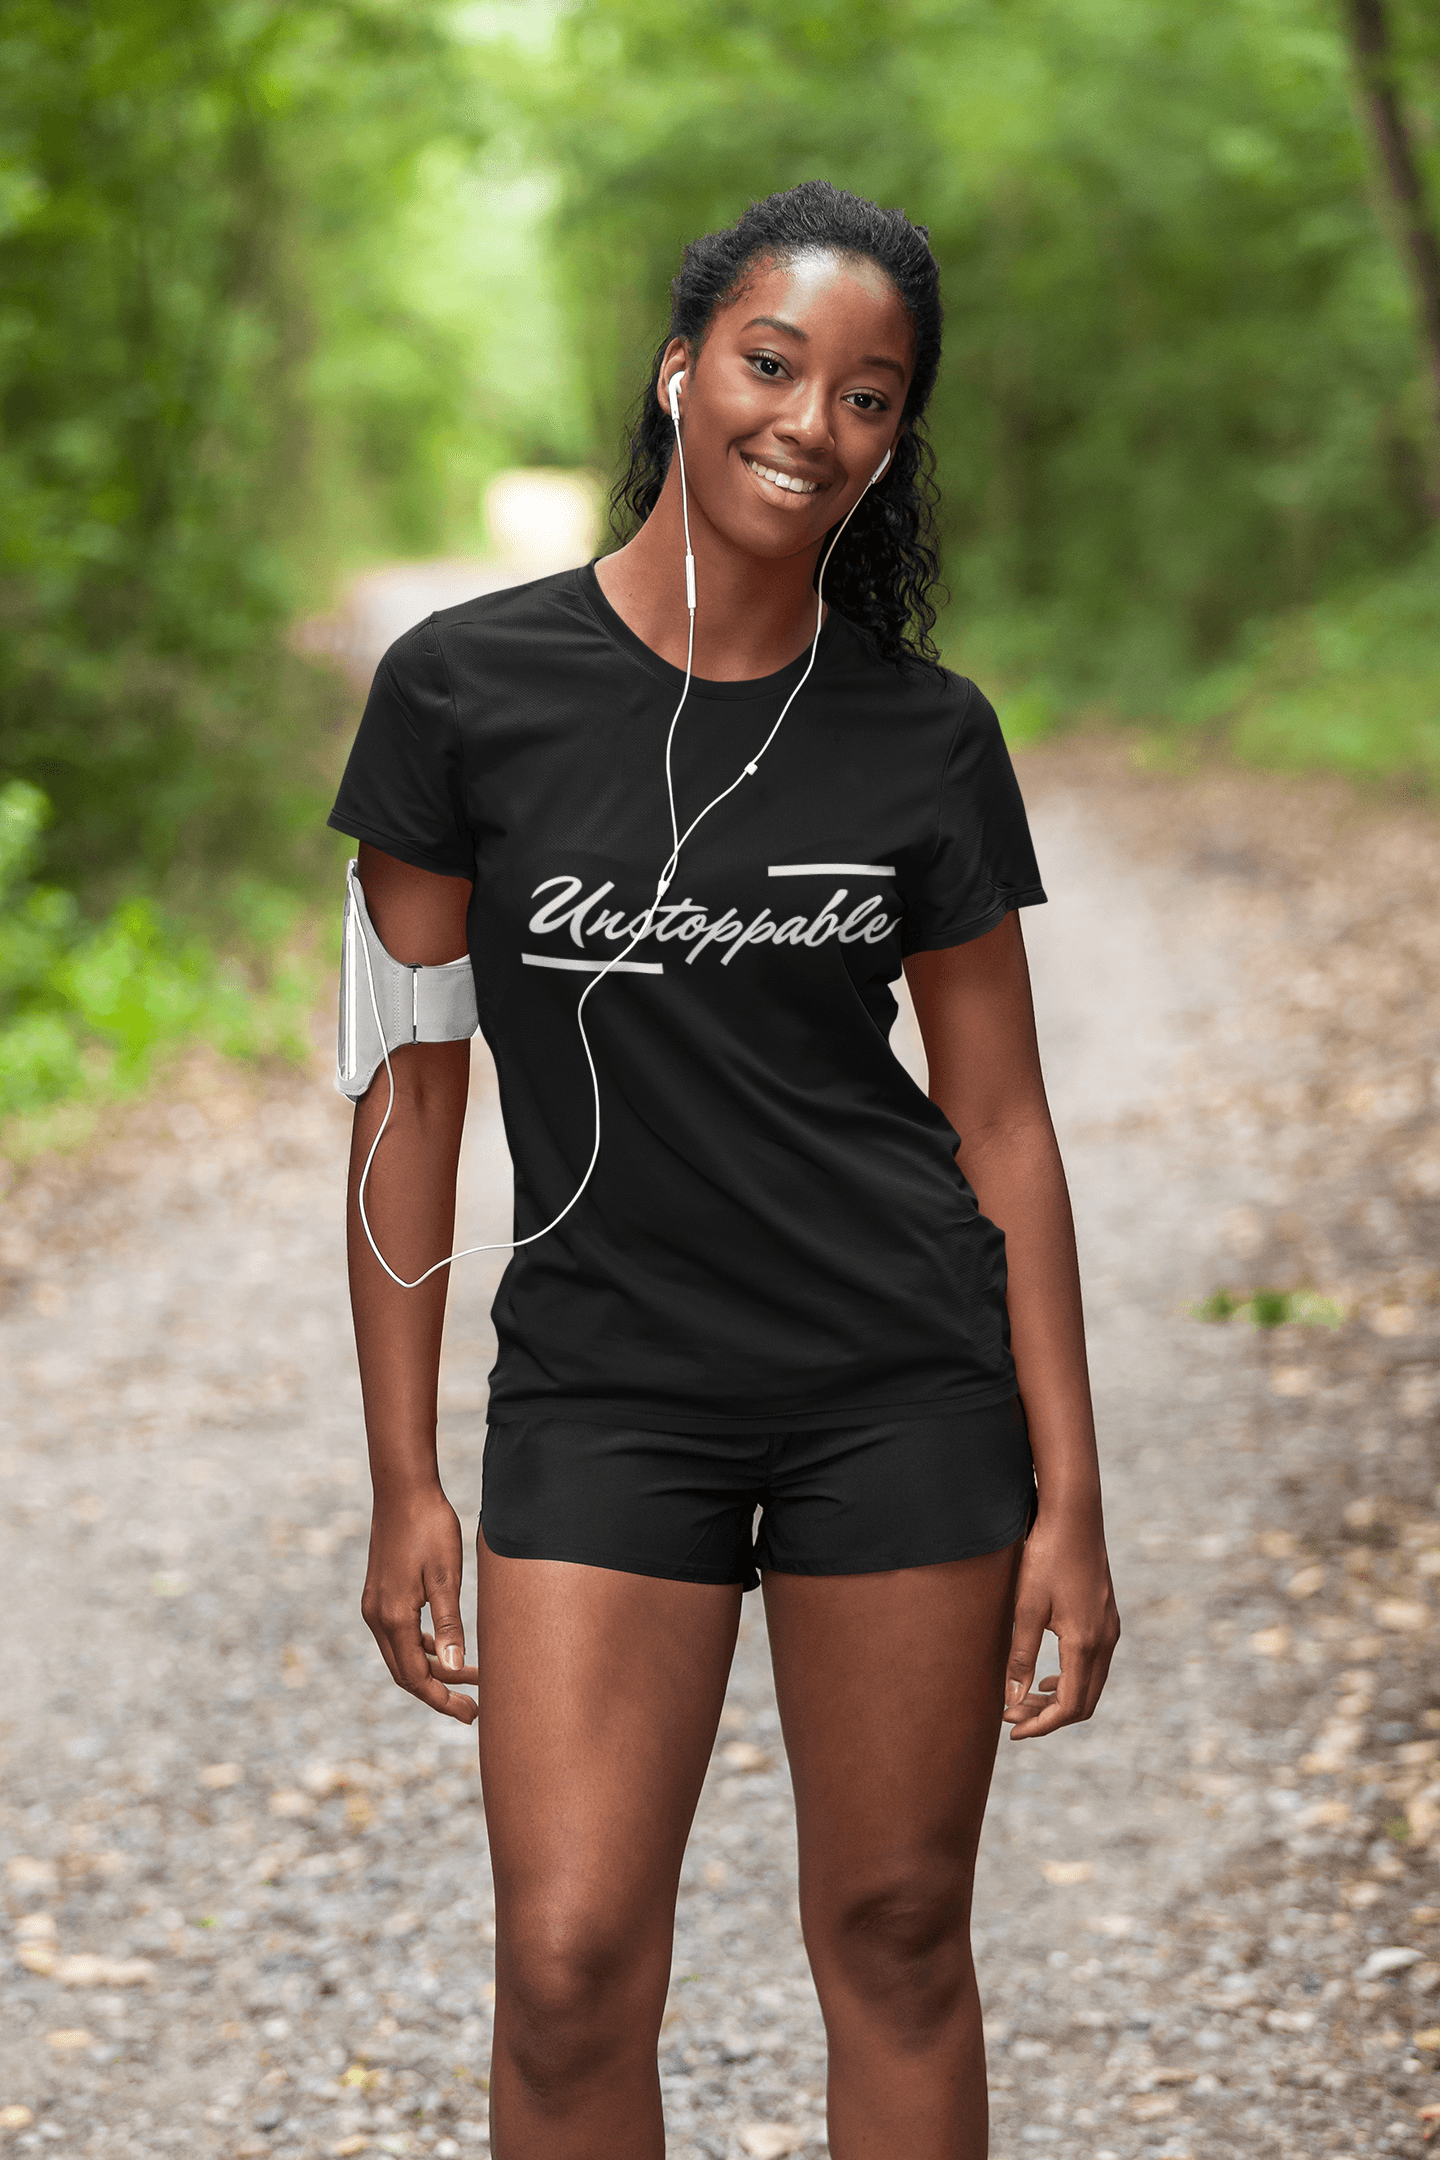 Unstoppable T-Shirt - Women Empowerment T-Shirts & Apparel | CP Designs Unlimited